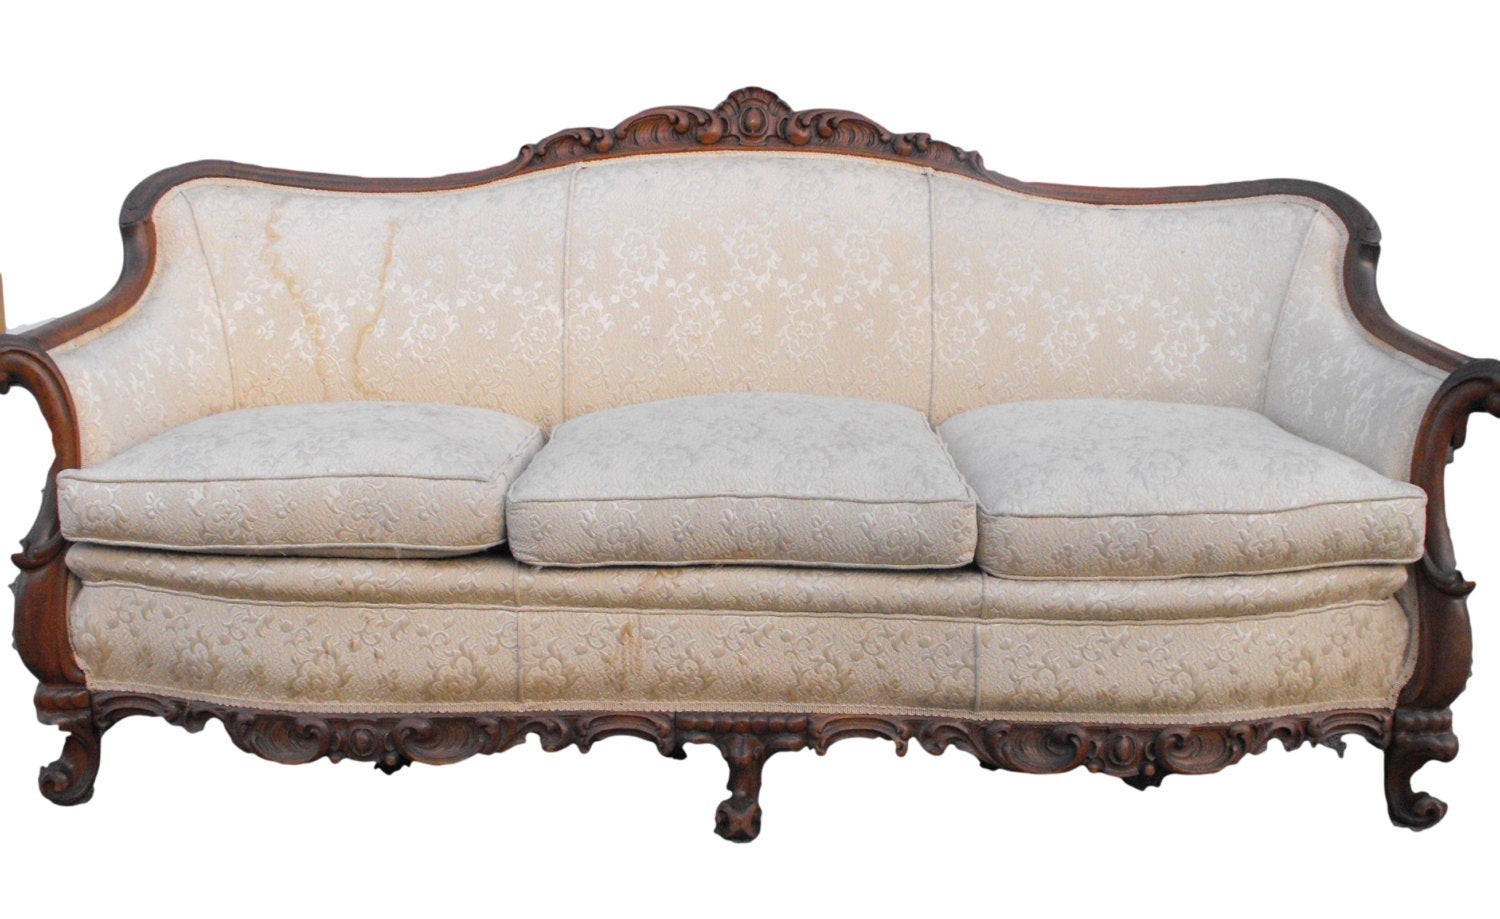 Vintage Sofa
 Reserved for Cynthia Antique victorian sofa couch price